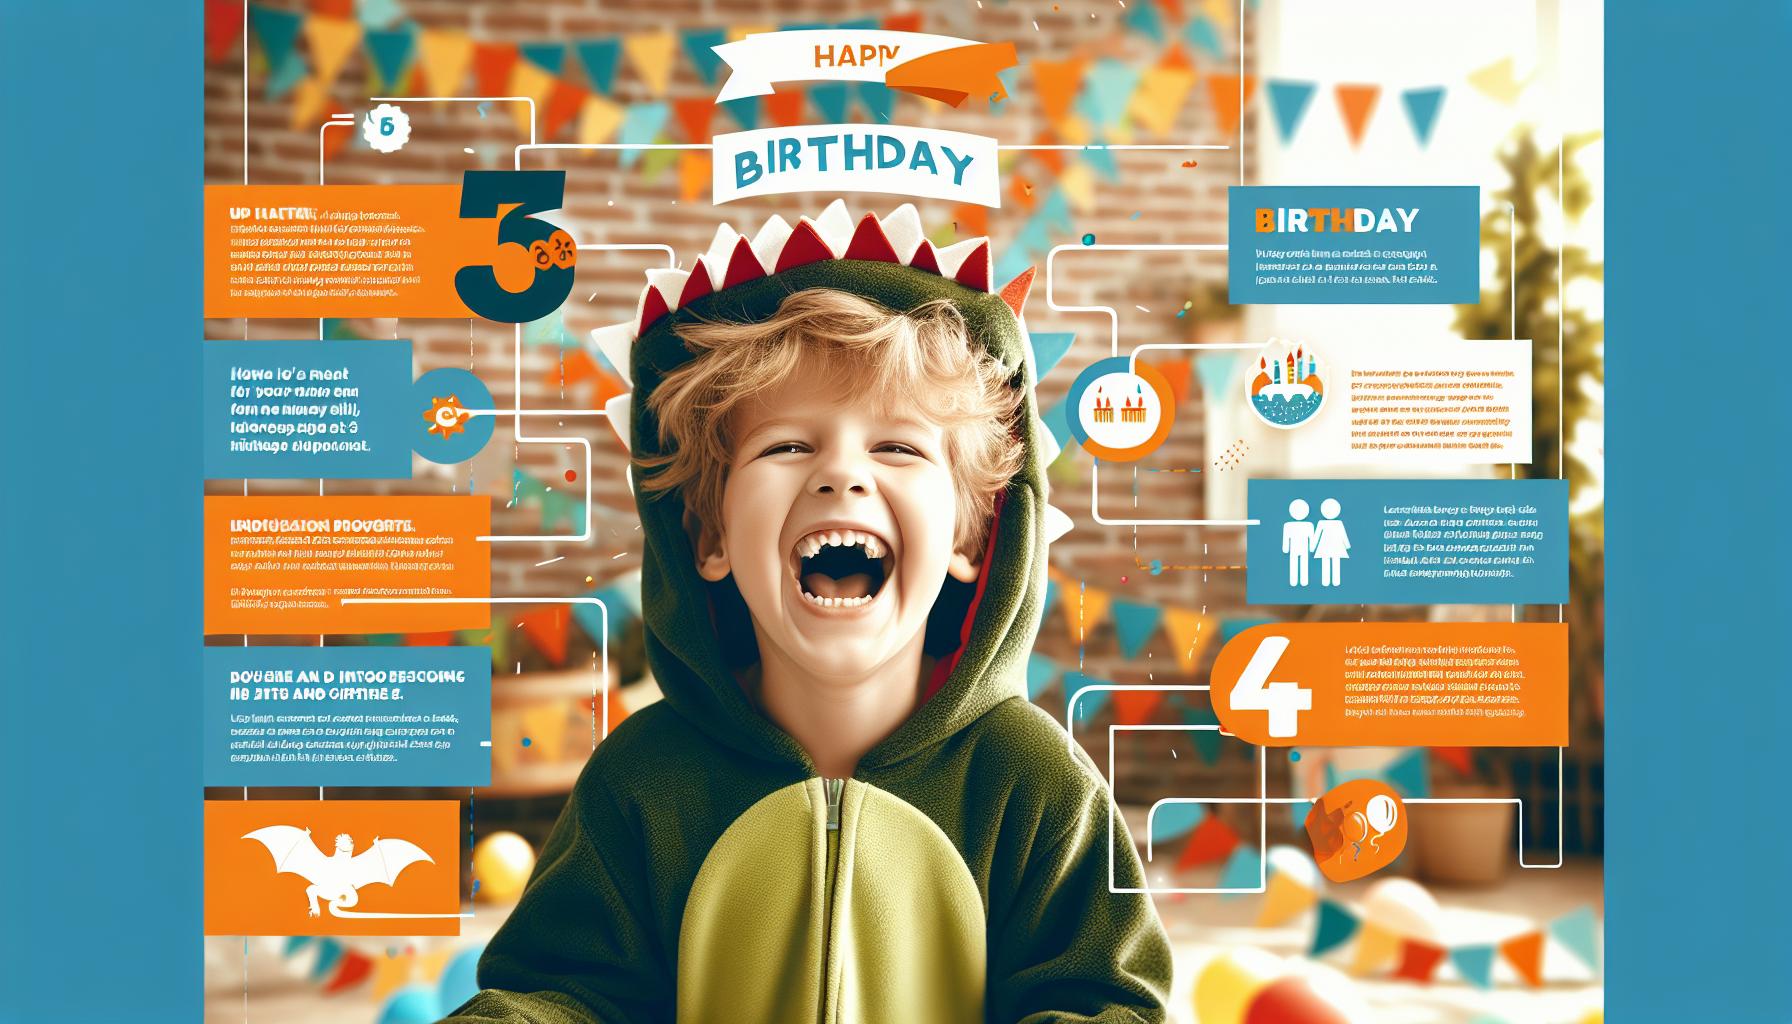 Celebrating Your Child: Unique and Heartfelt 5th Birthday Wishes for Your Son